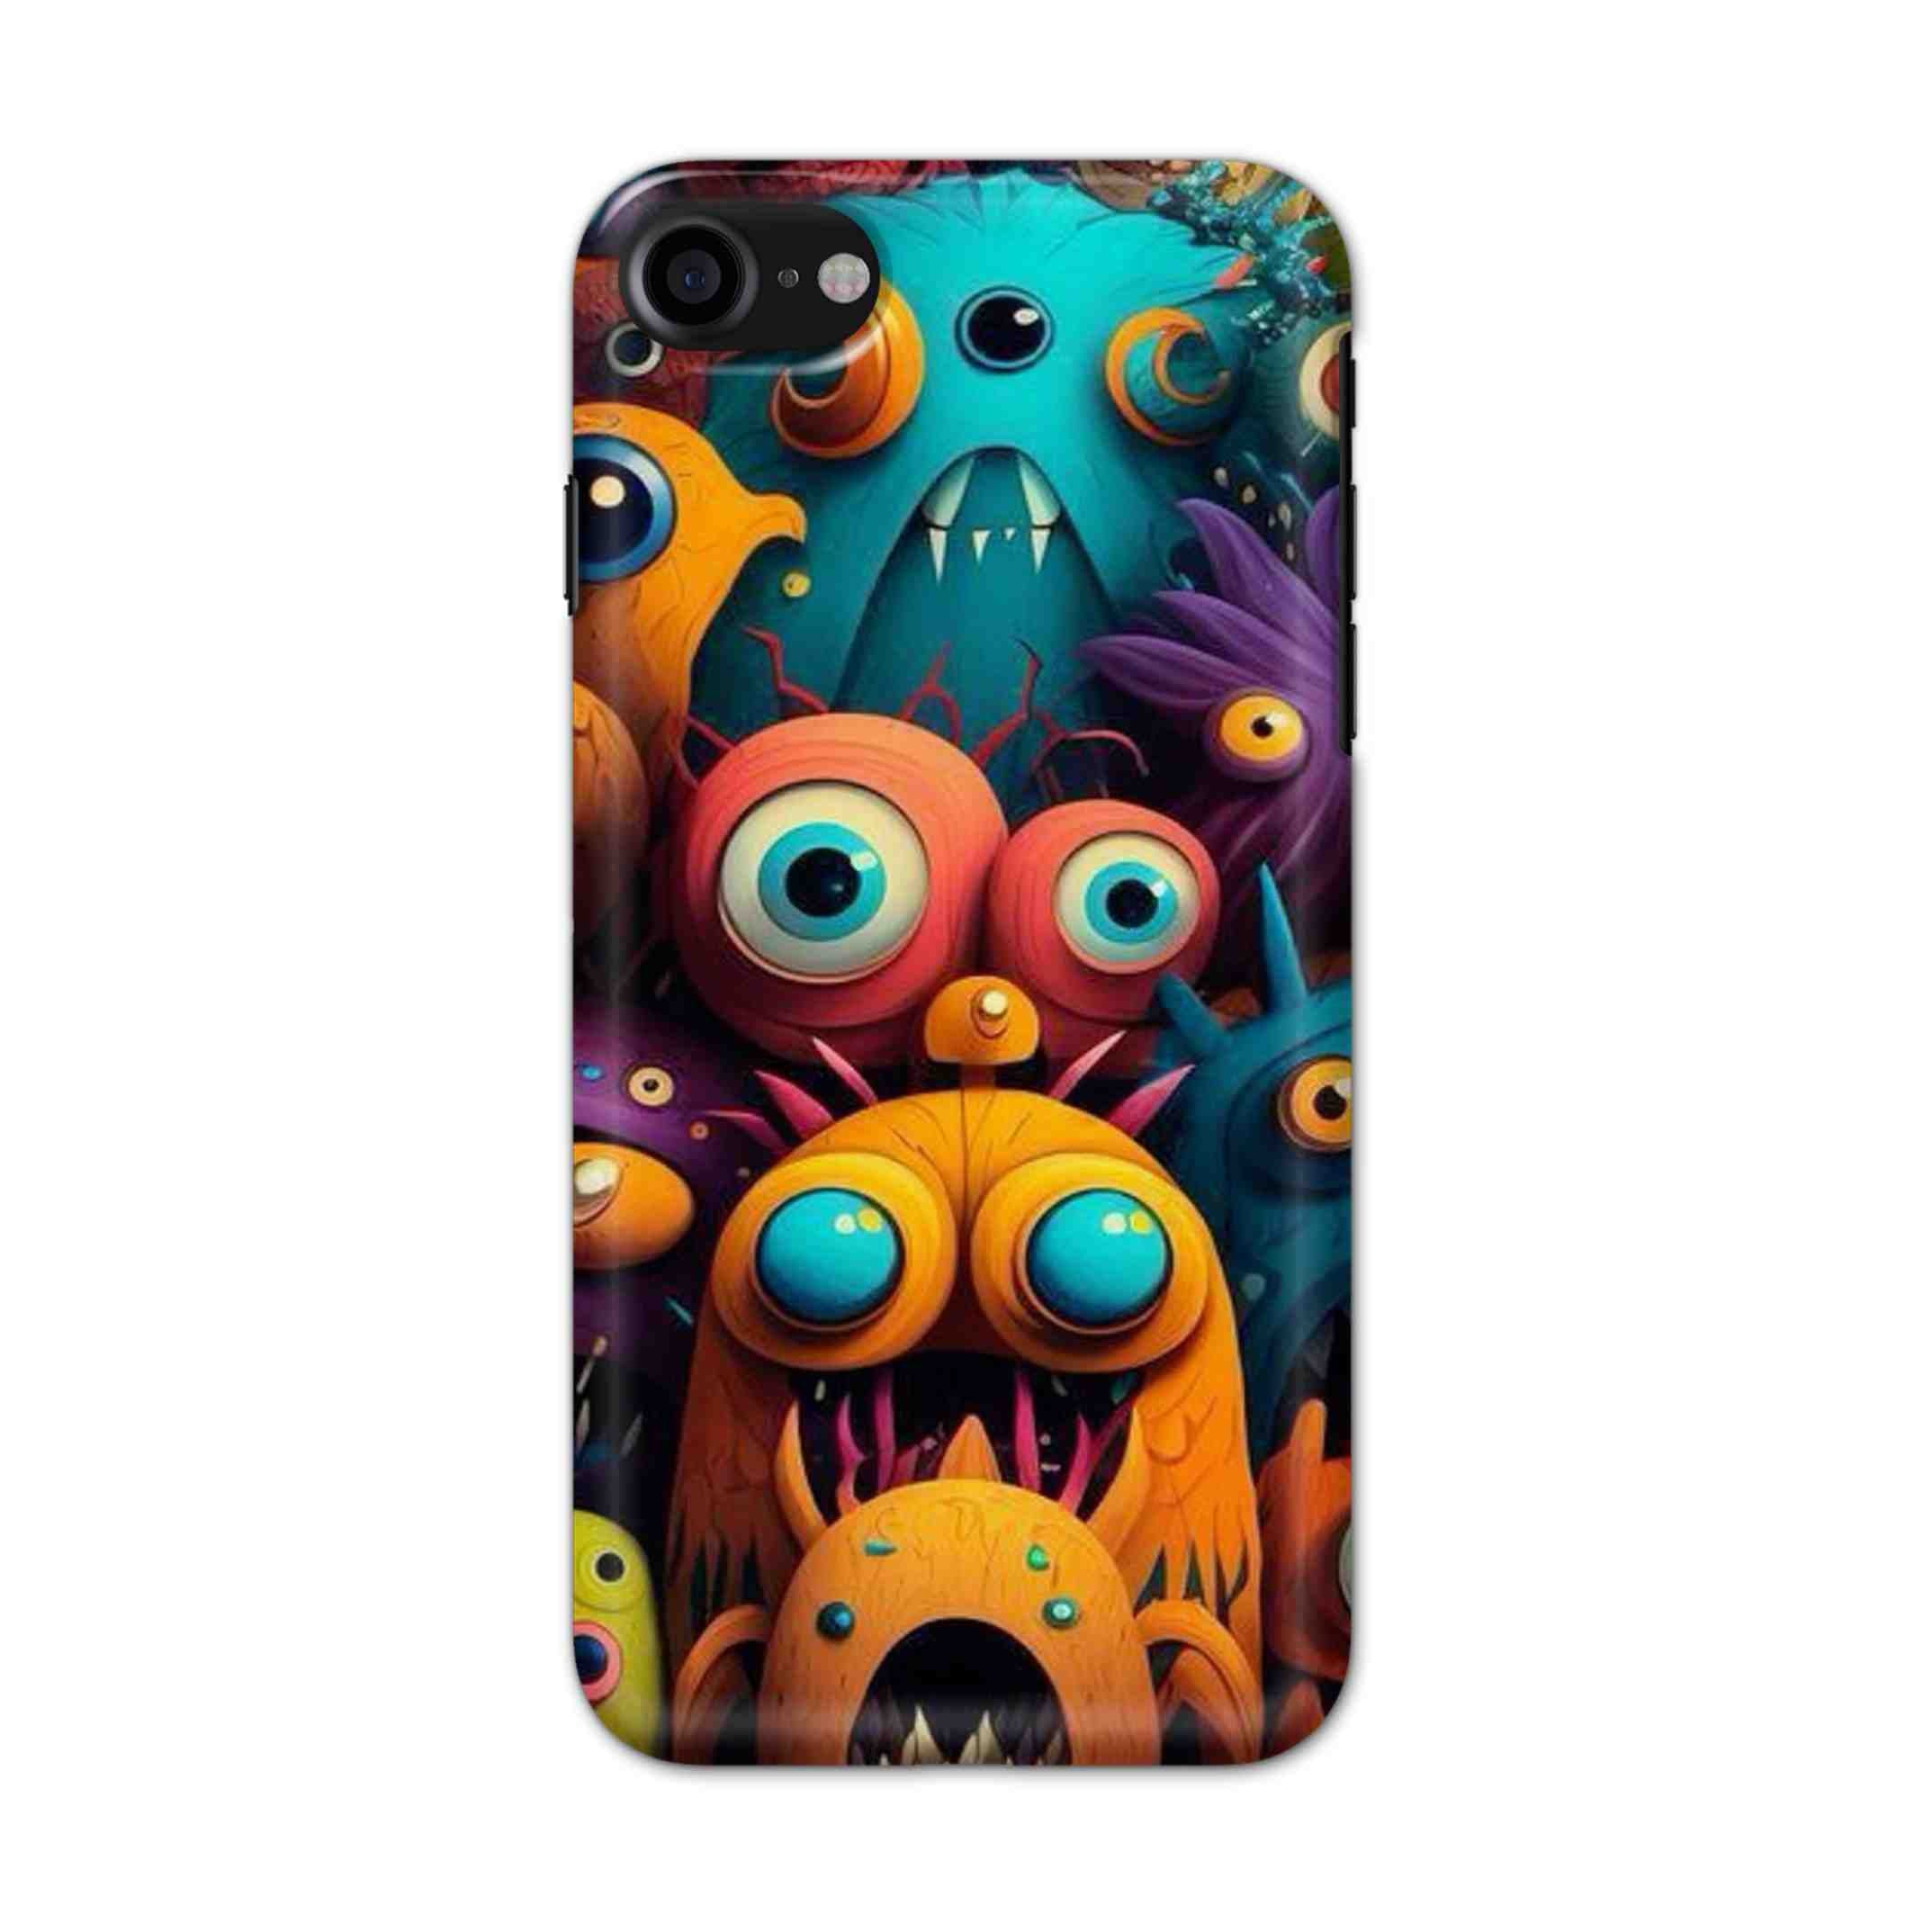 Buy Zombie Hard Back Mobile Phone Case/Cover For iPhone 7 / 8 Online